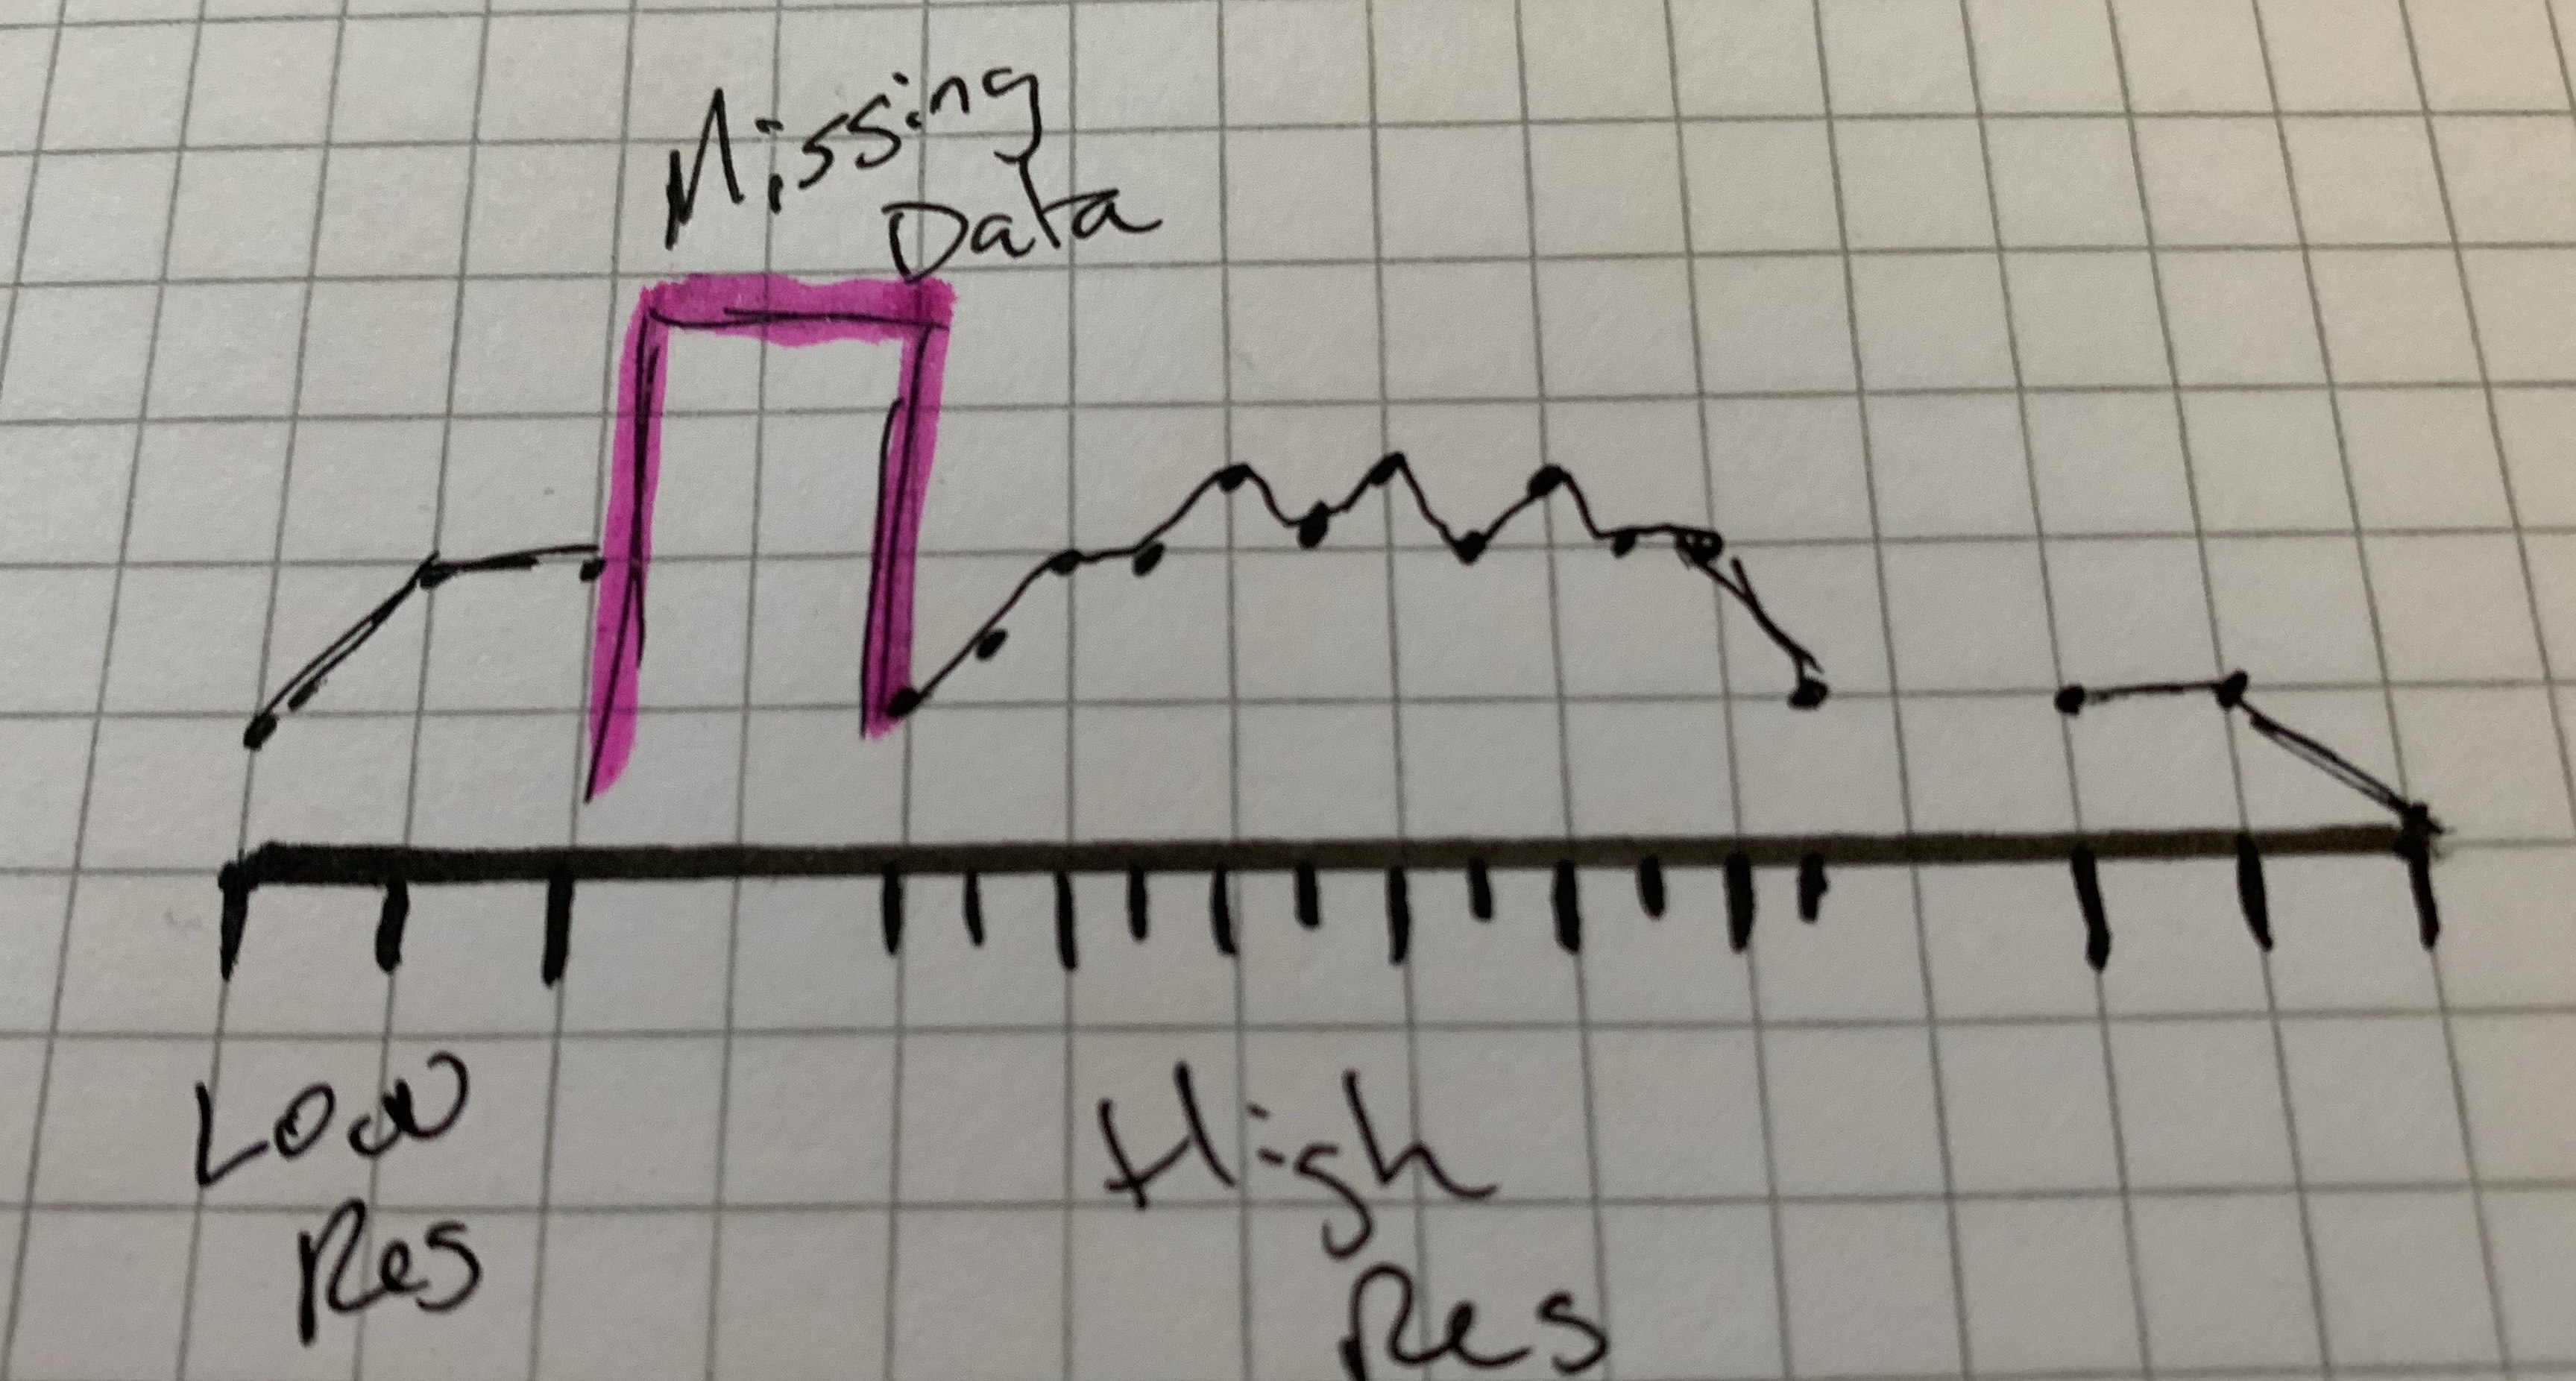 How to visualize changing intervals and missing data